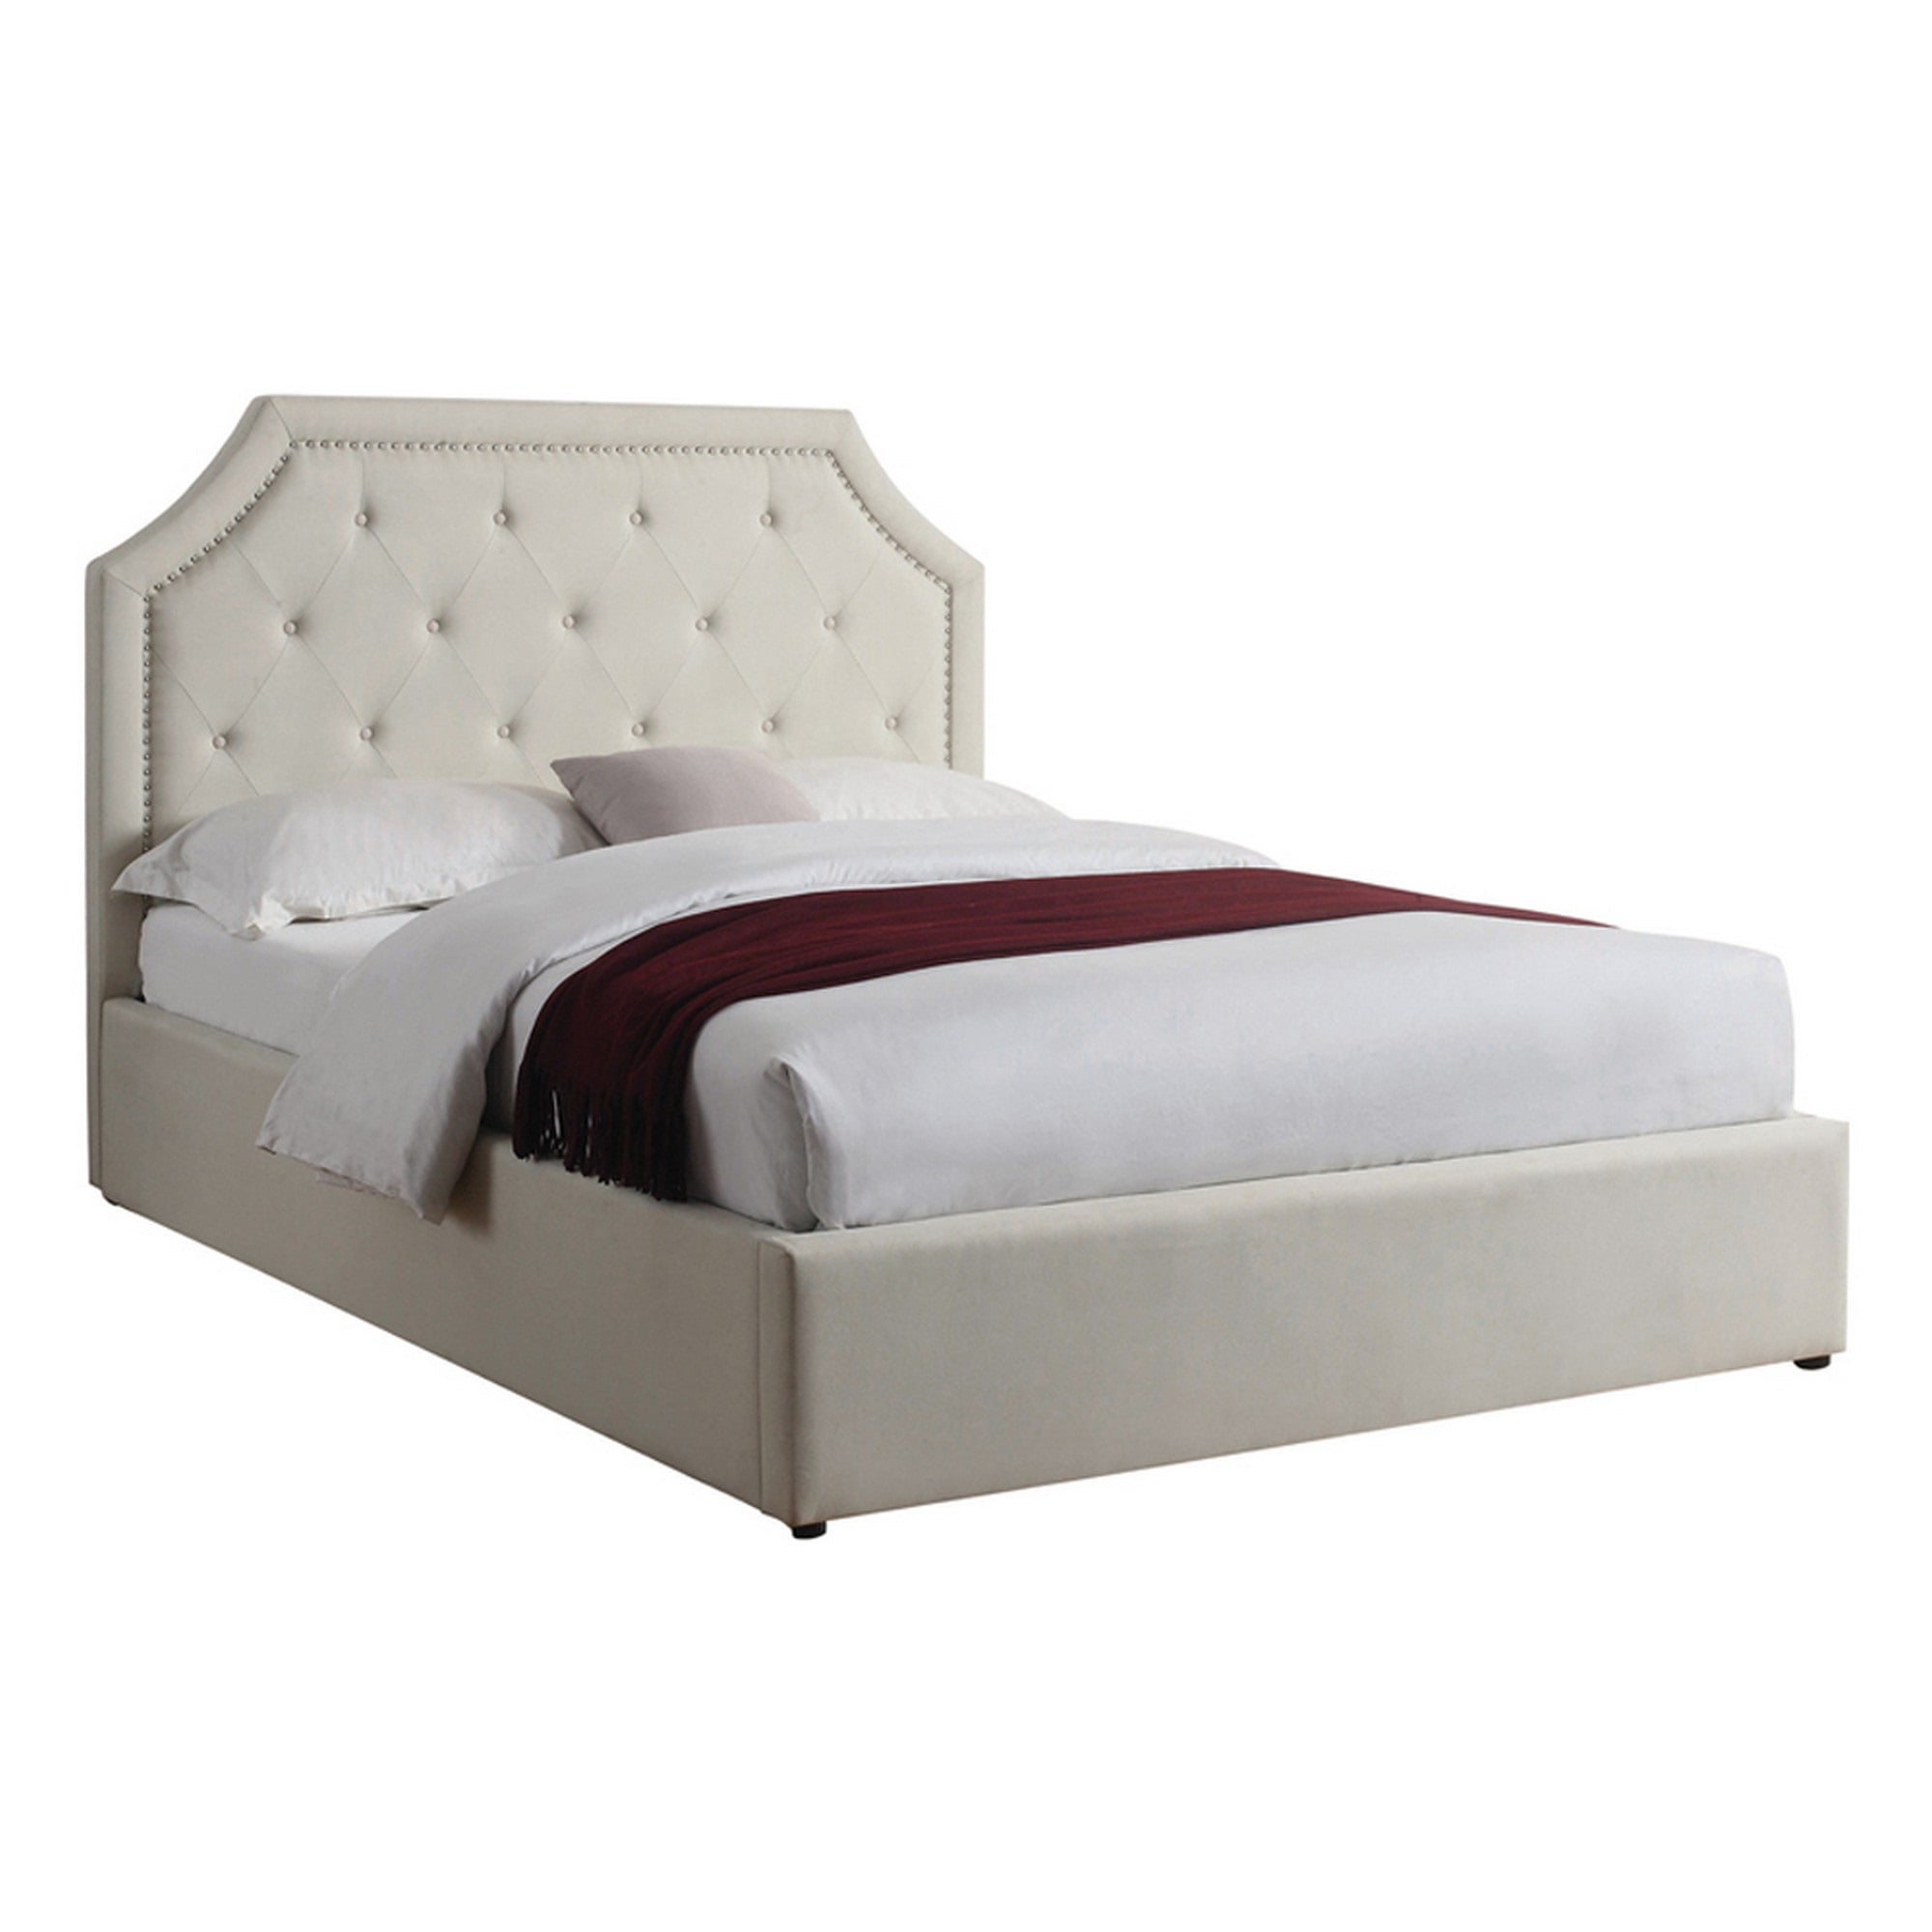 Eastern King Storage Bed With Scooped, Hydraulic Lift Bed King